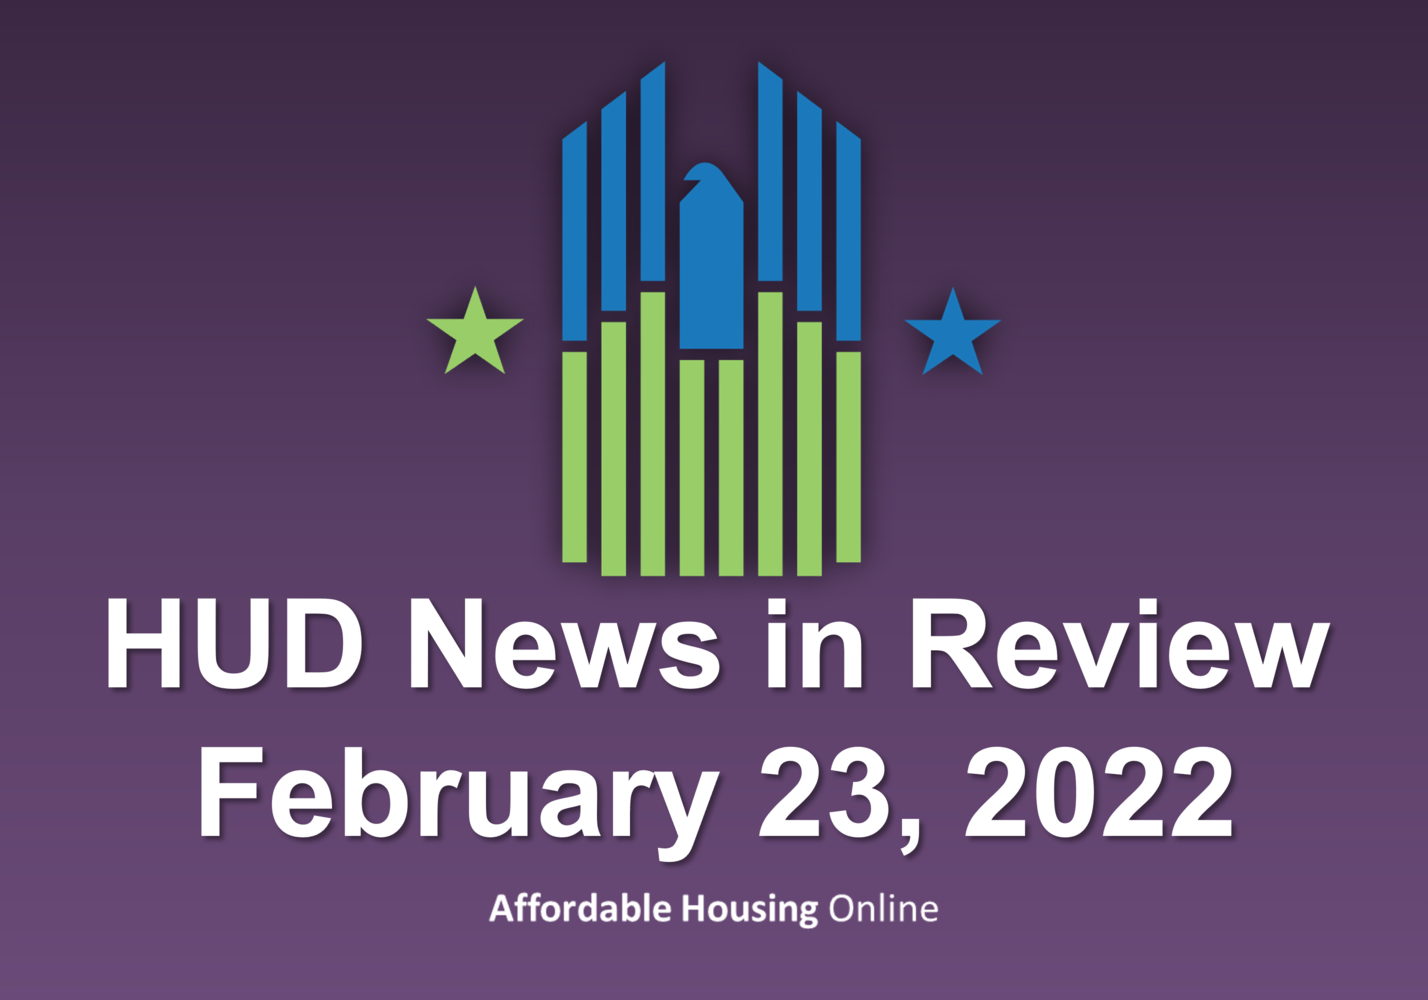 HUD News in Review banner image for February 23, 2022